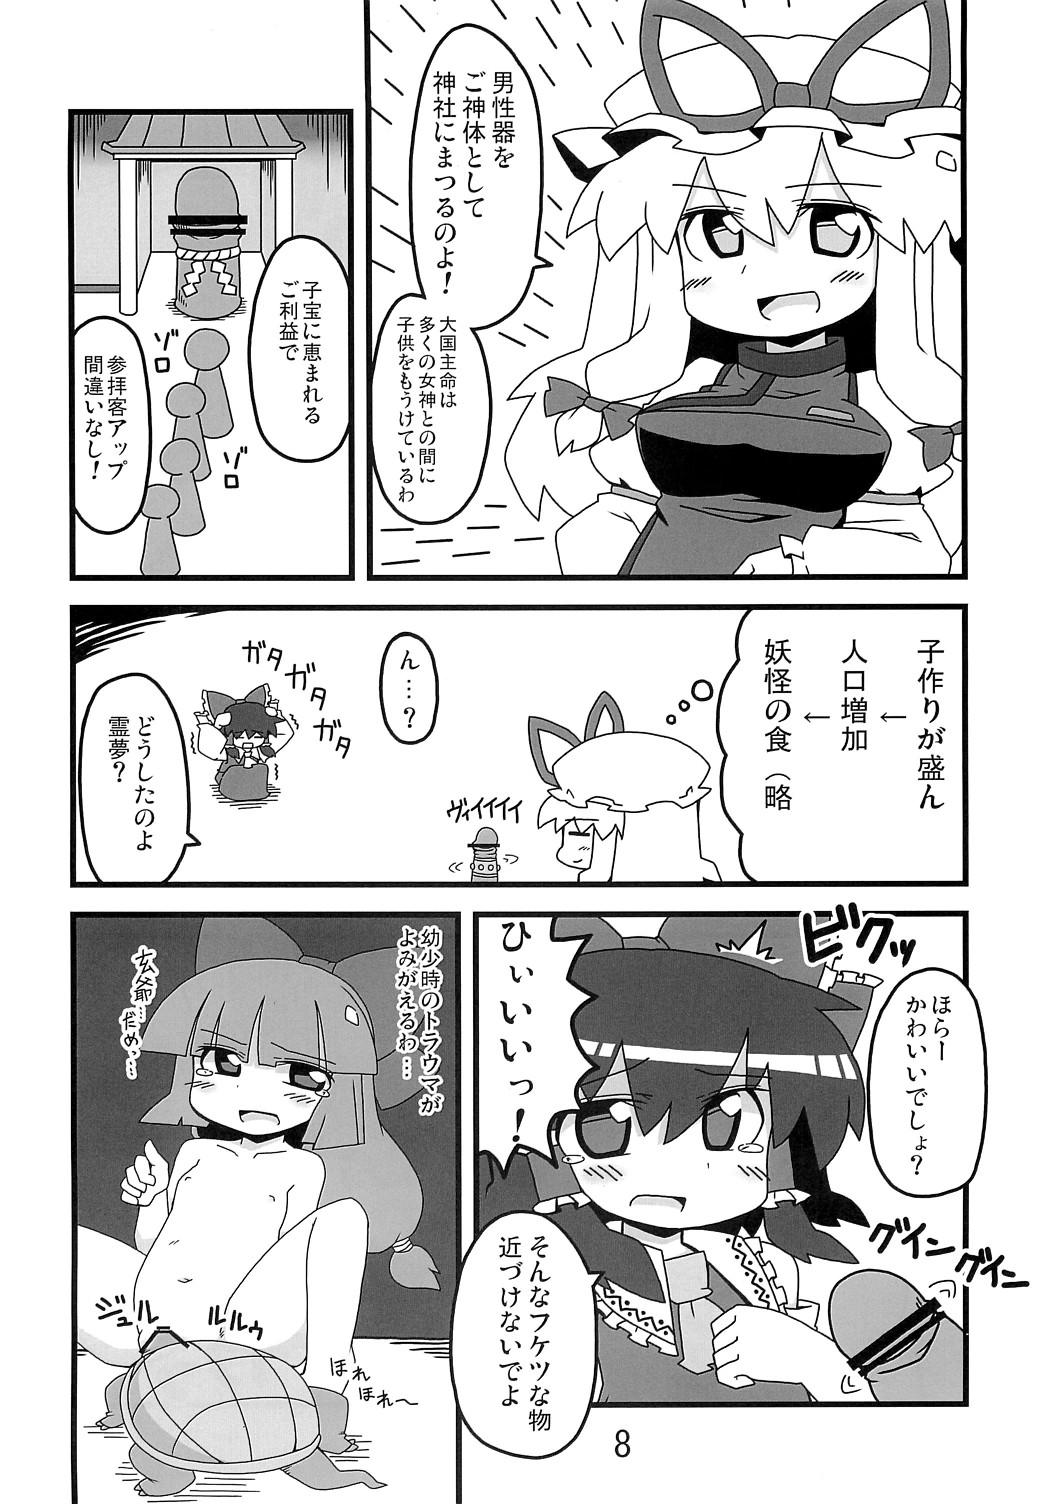 Dominicana 東方豊年祭 - Touhou project Femdom - Page 7